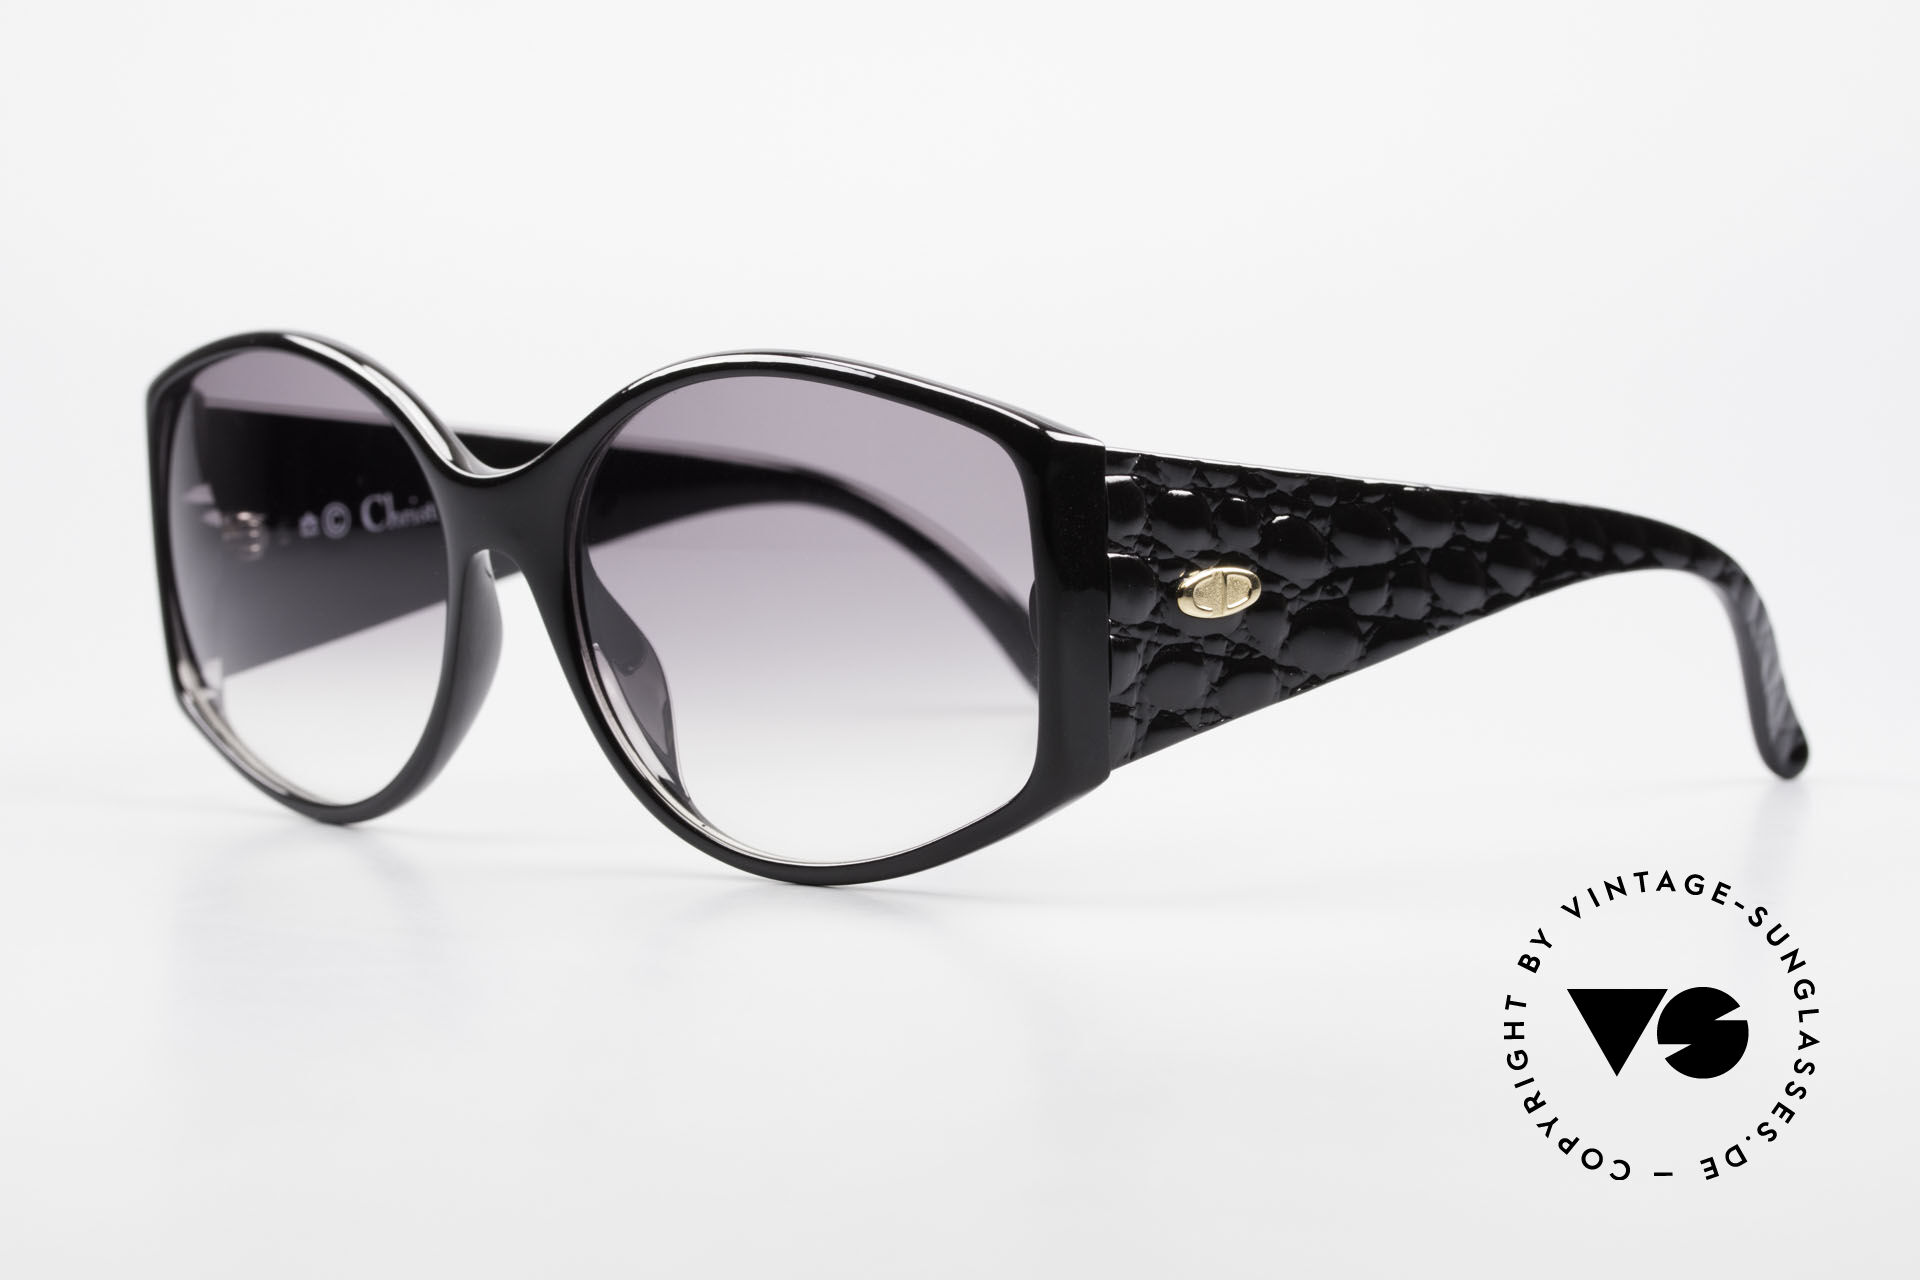 Discover more than 153 vintage sunglasses for ladies super hot